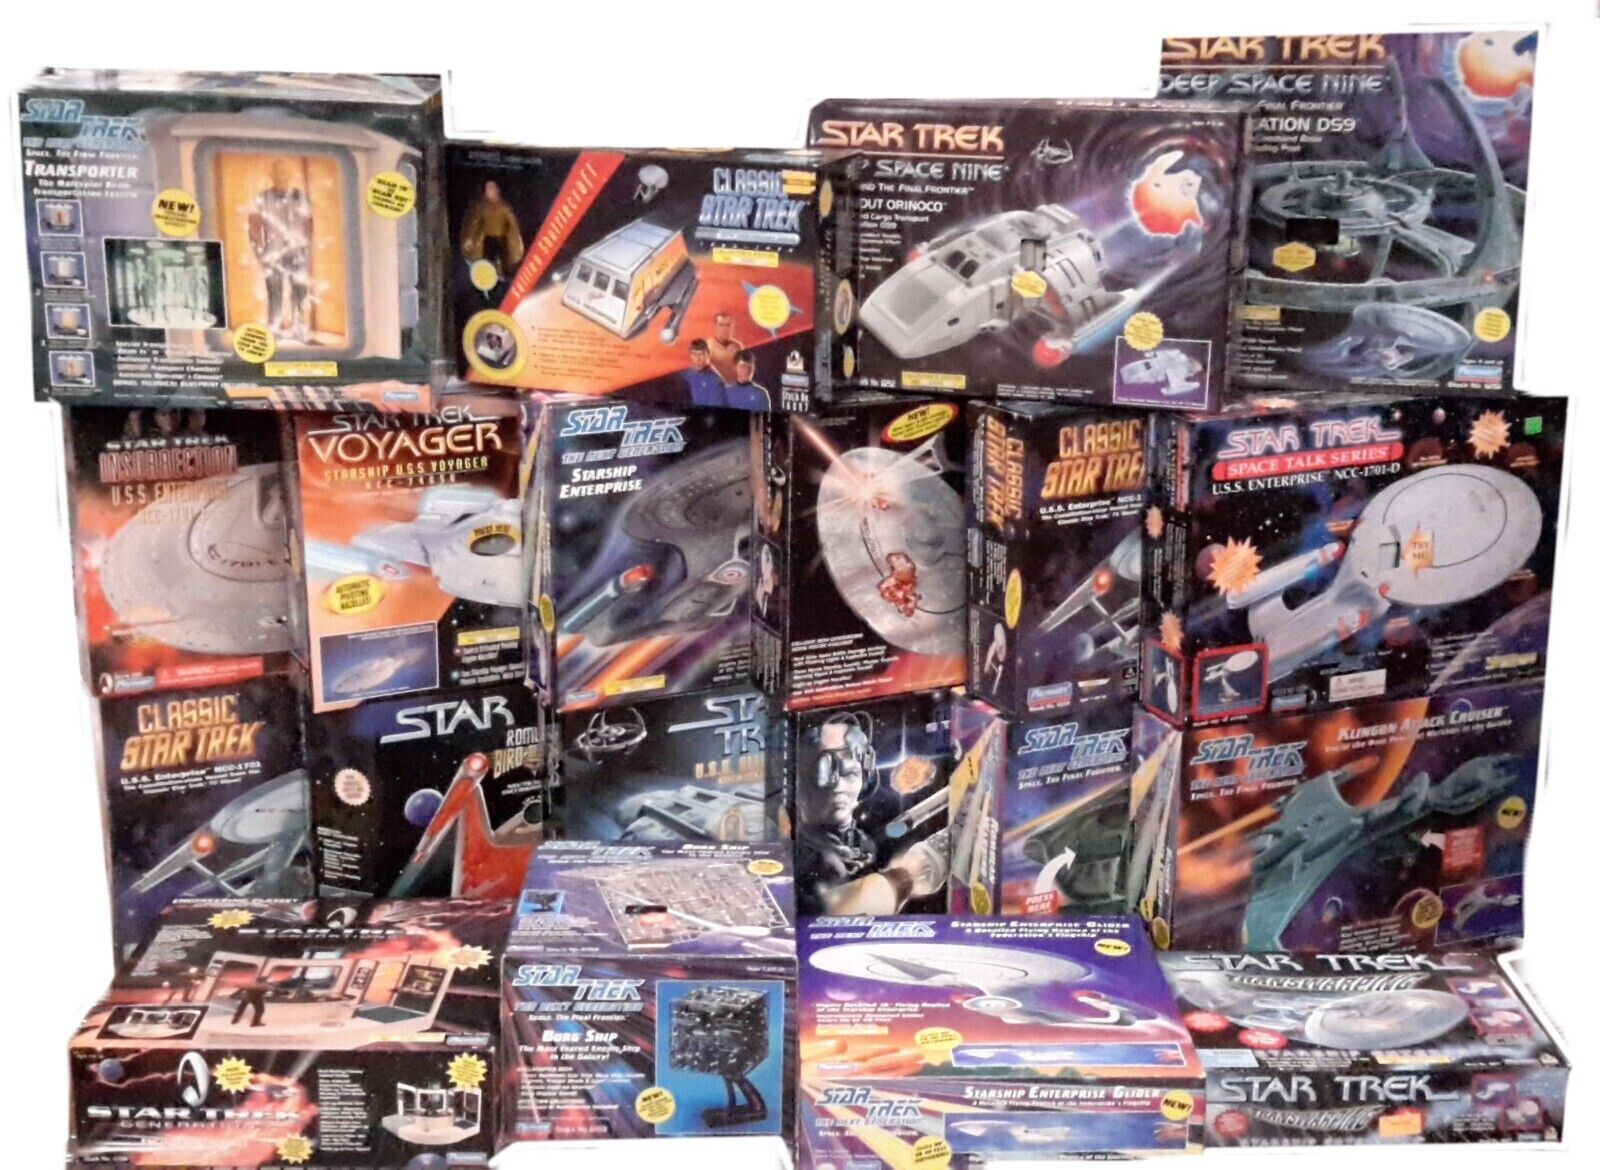 Mixed Manufacturer Star Trek Toy Collection from 1967 - Now All Boxed, Sealed.